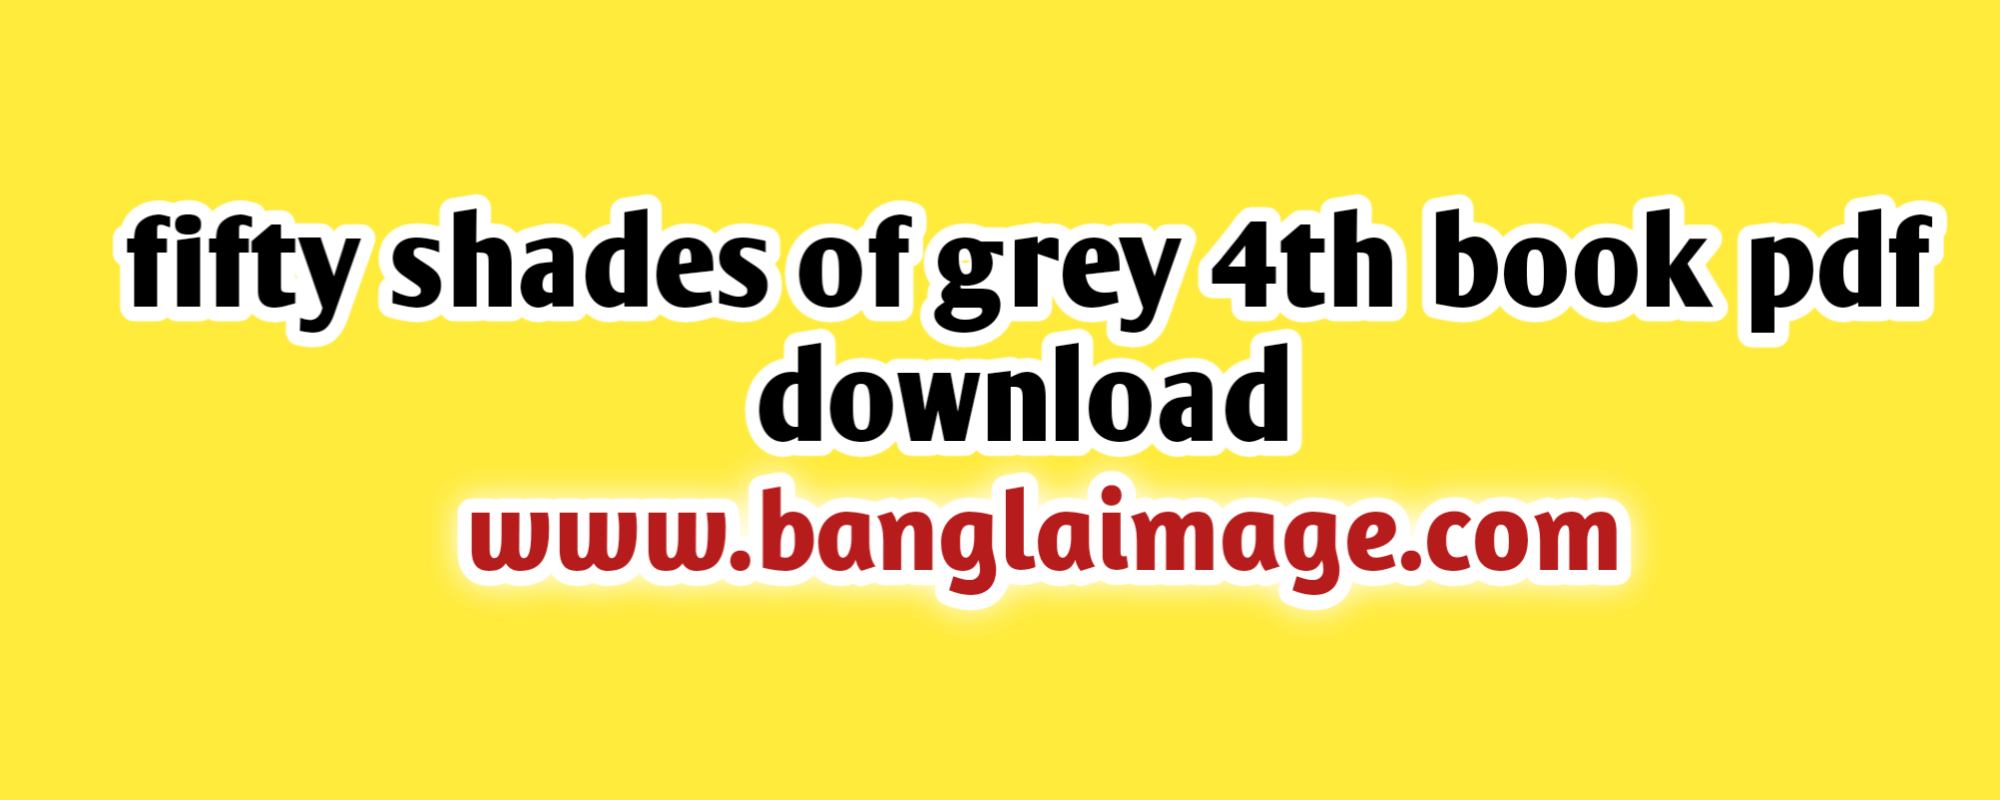 fifty shades of grey 4th book pdf download, fifty shades of grey book pages, fifty shades freed pdf vk, fifty shades of grey novel in englishGreetings and best wishes from our Banglaimage.com site to those who are searching on Google or social media. We notice at different times that you are looking for different types of useful pdf books online, but still do not find the necessary pdf books, they can download all kinds of pdf books from our site.  fifty shades of grey 4th book pdf download fifty shades of grey 4th book pdf download this pdf book is a very important pdf book. Many of you love to read pdf books. Pdf book lovers can easily download this book from our site.      fifty shades freed pdf vk fifty shades freed pdf vk for those who are looking to download, I hope you find our post very useful. Be sure to visit our site to get all kinds of PDF books.  fifty shades of grey novel in english fifty shades of grey novel in englishwe think that this PDF book will be very helpful for the students of this subject. So download the book you need from the link given below.  fifty shades of grey book pages fifty shades of grey book pages by reading this pdf book you will find detailed information about this book. We hope that pdf book will help you to increase the scope of your knowledge.  Download  Tags: fifty shades of grey 4th book pdf download, fifty shades of grey book pages, fifty shades freed pdf vk, the fifty shades of grey book pages